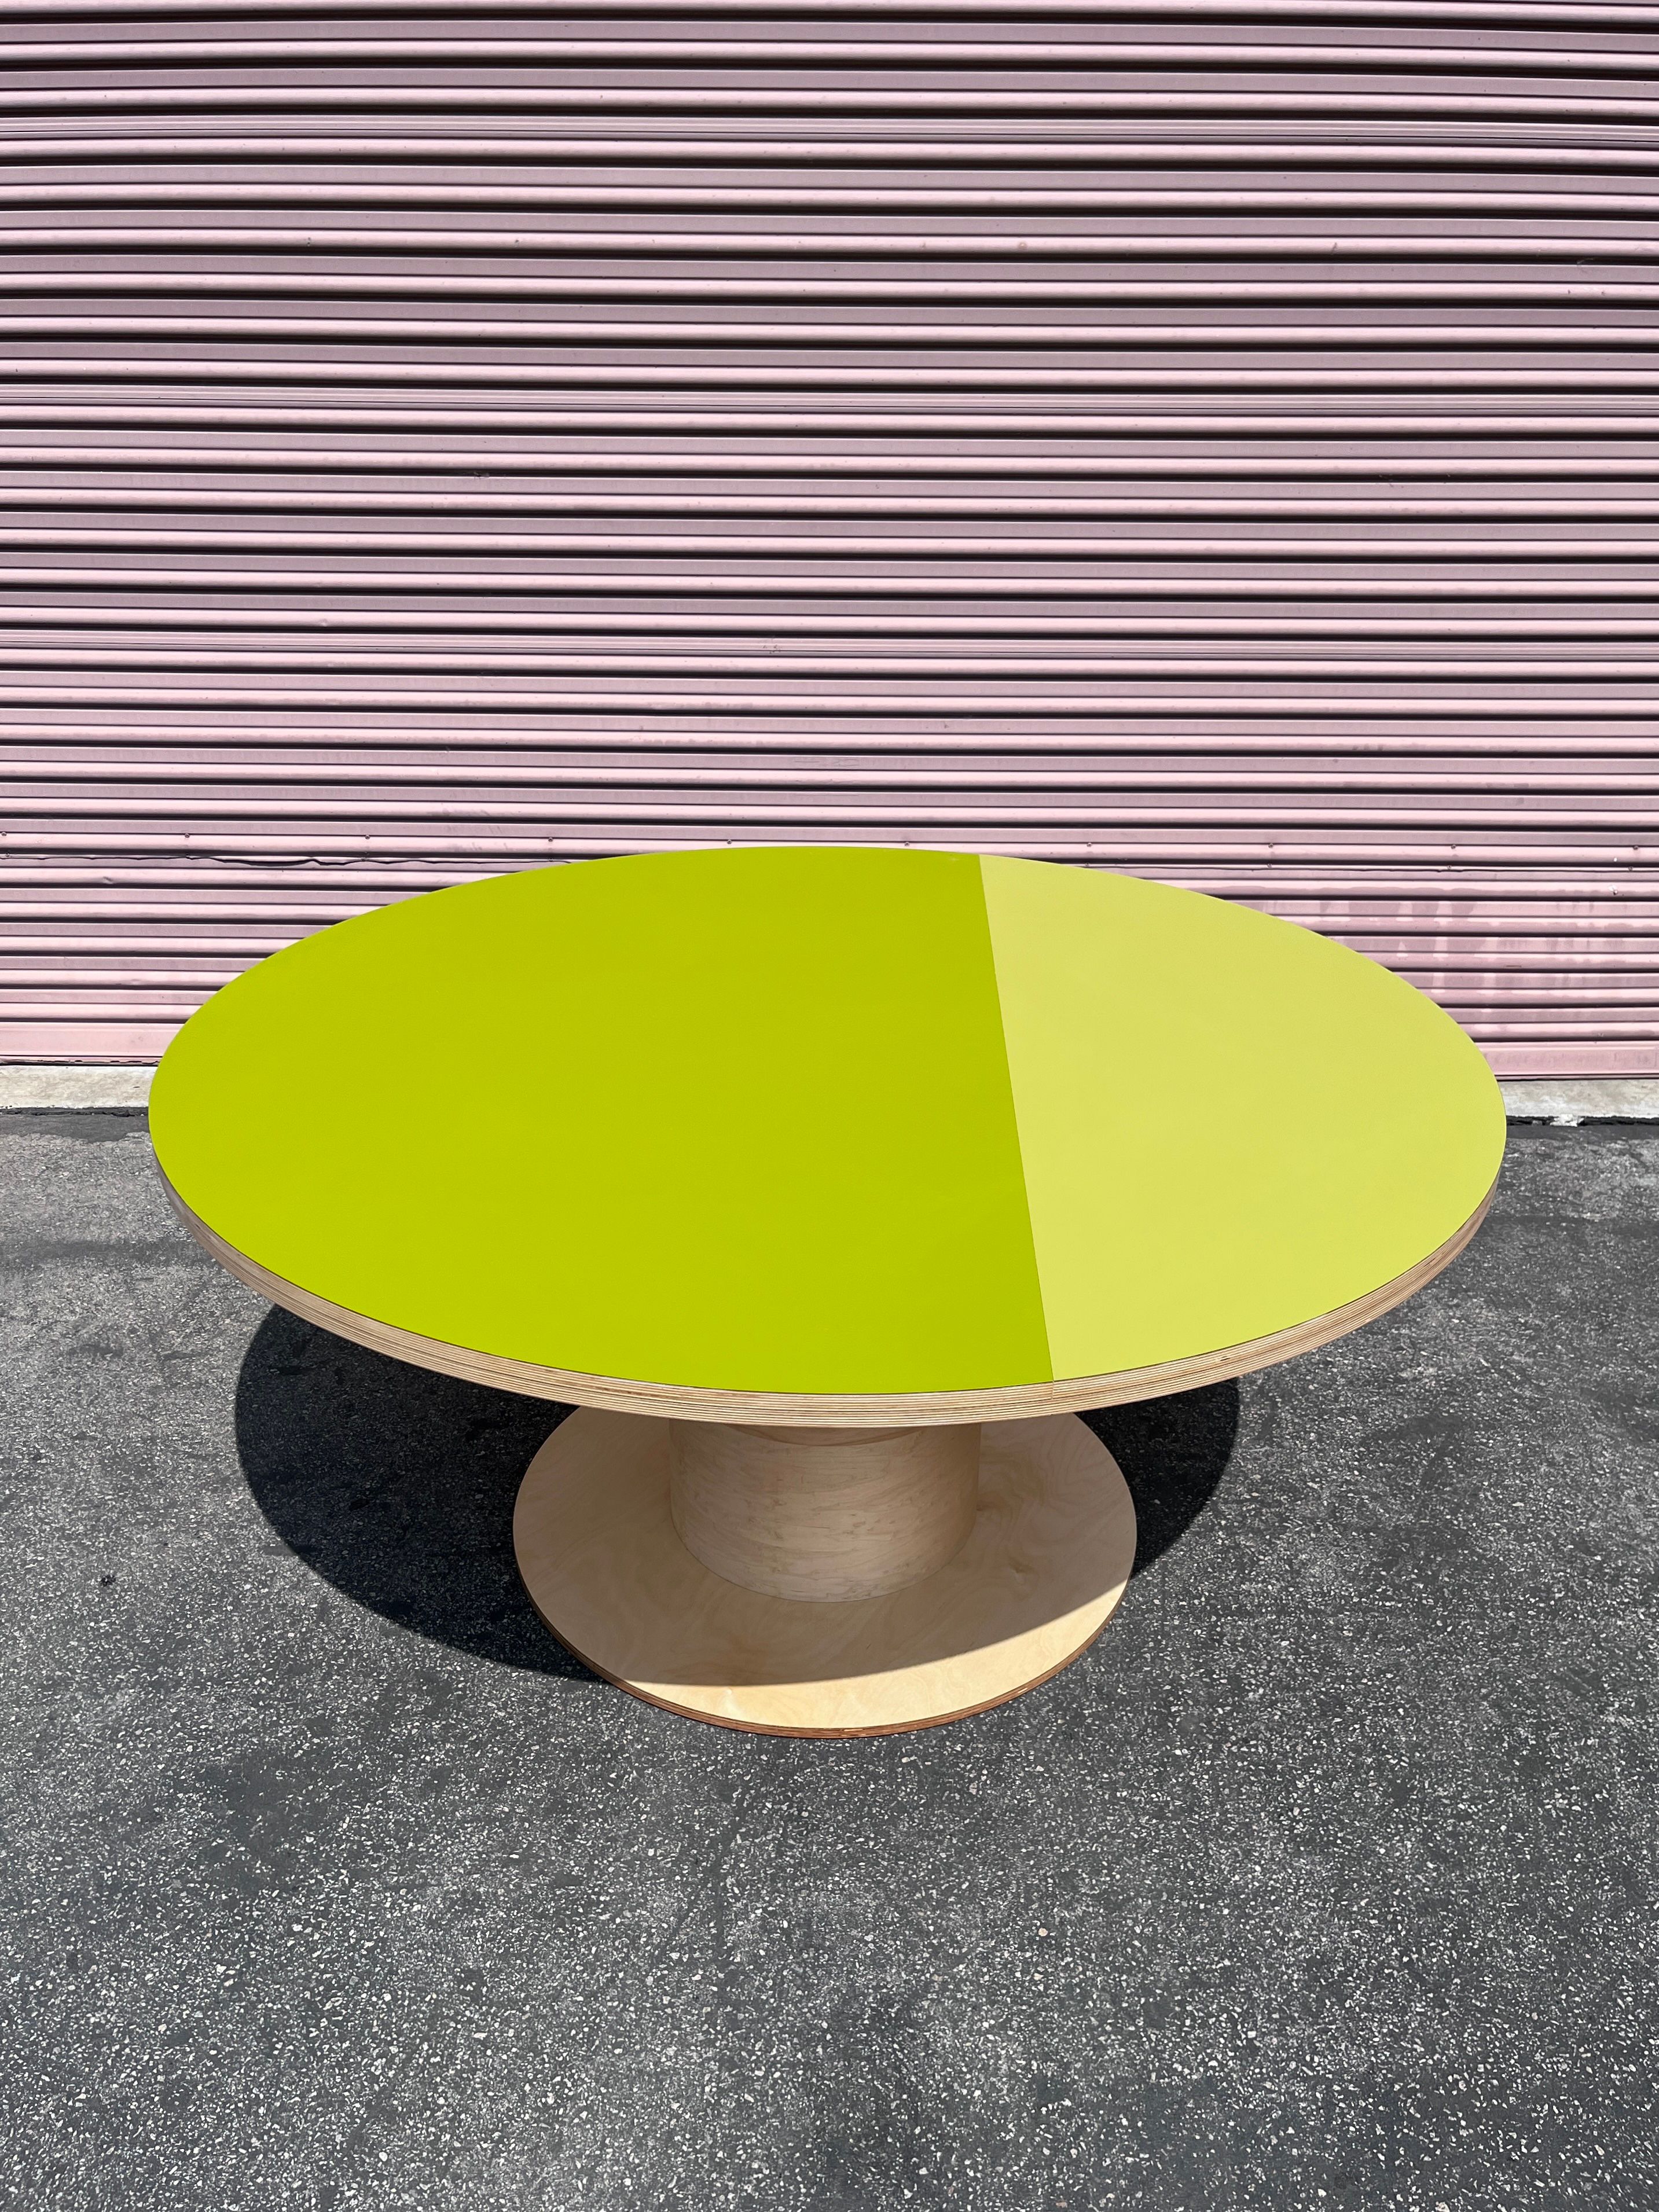  Two Tone Circle Table product image 1